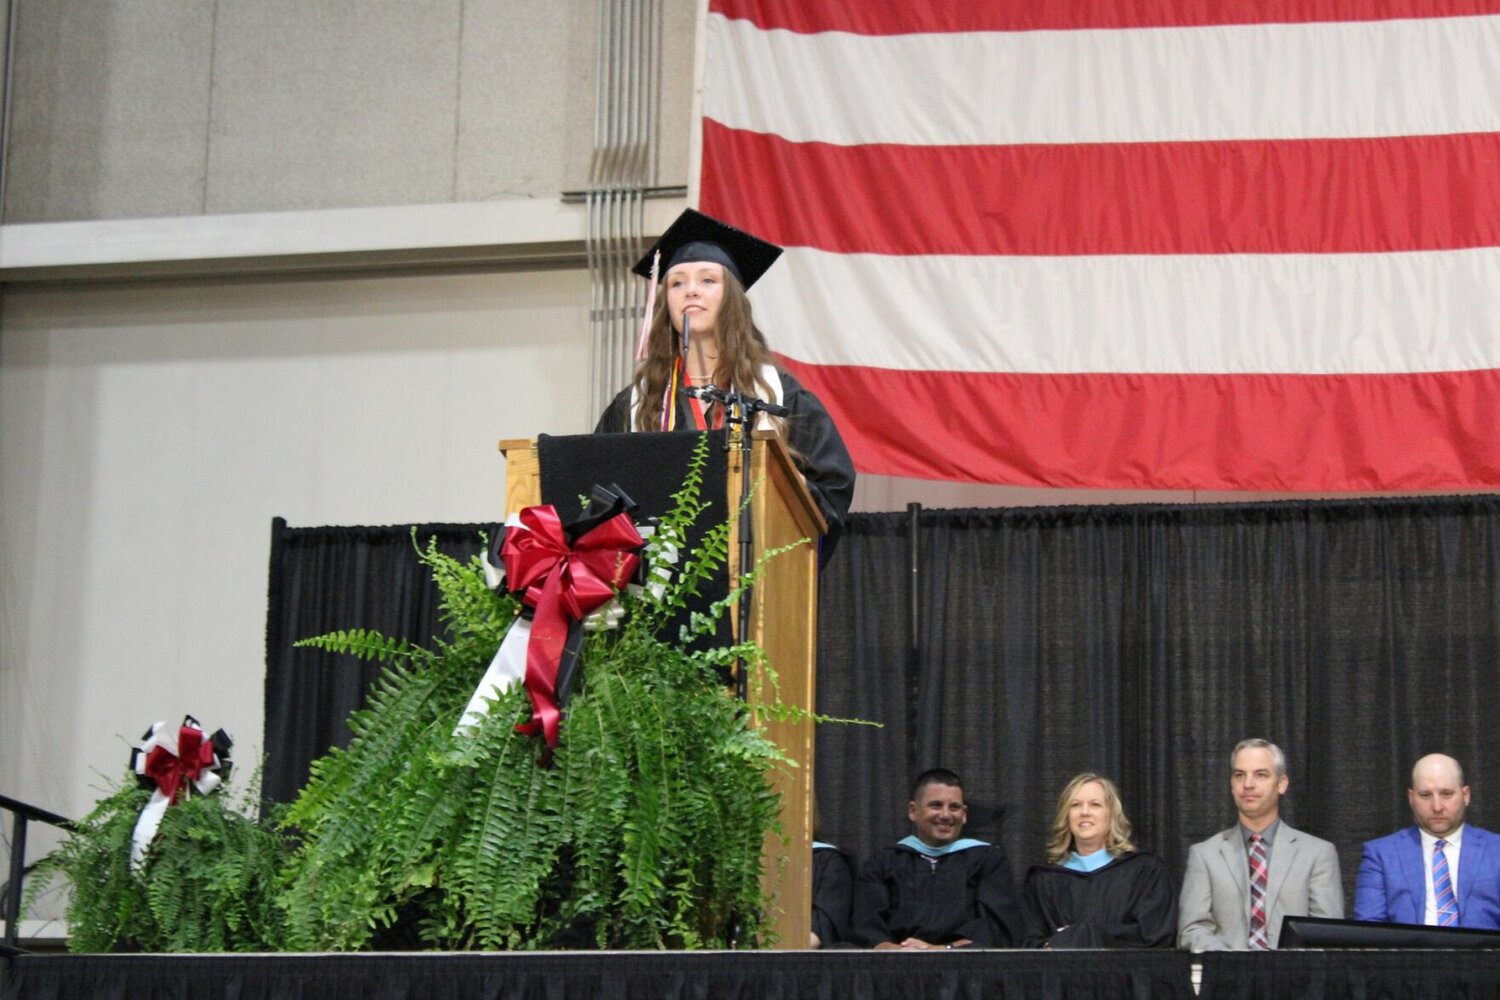 Valedictorian Makenna Shifflett delivers a moving speech ahead of diplomas being awarded to the Class of 2023.